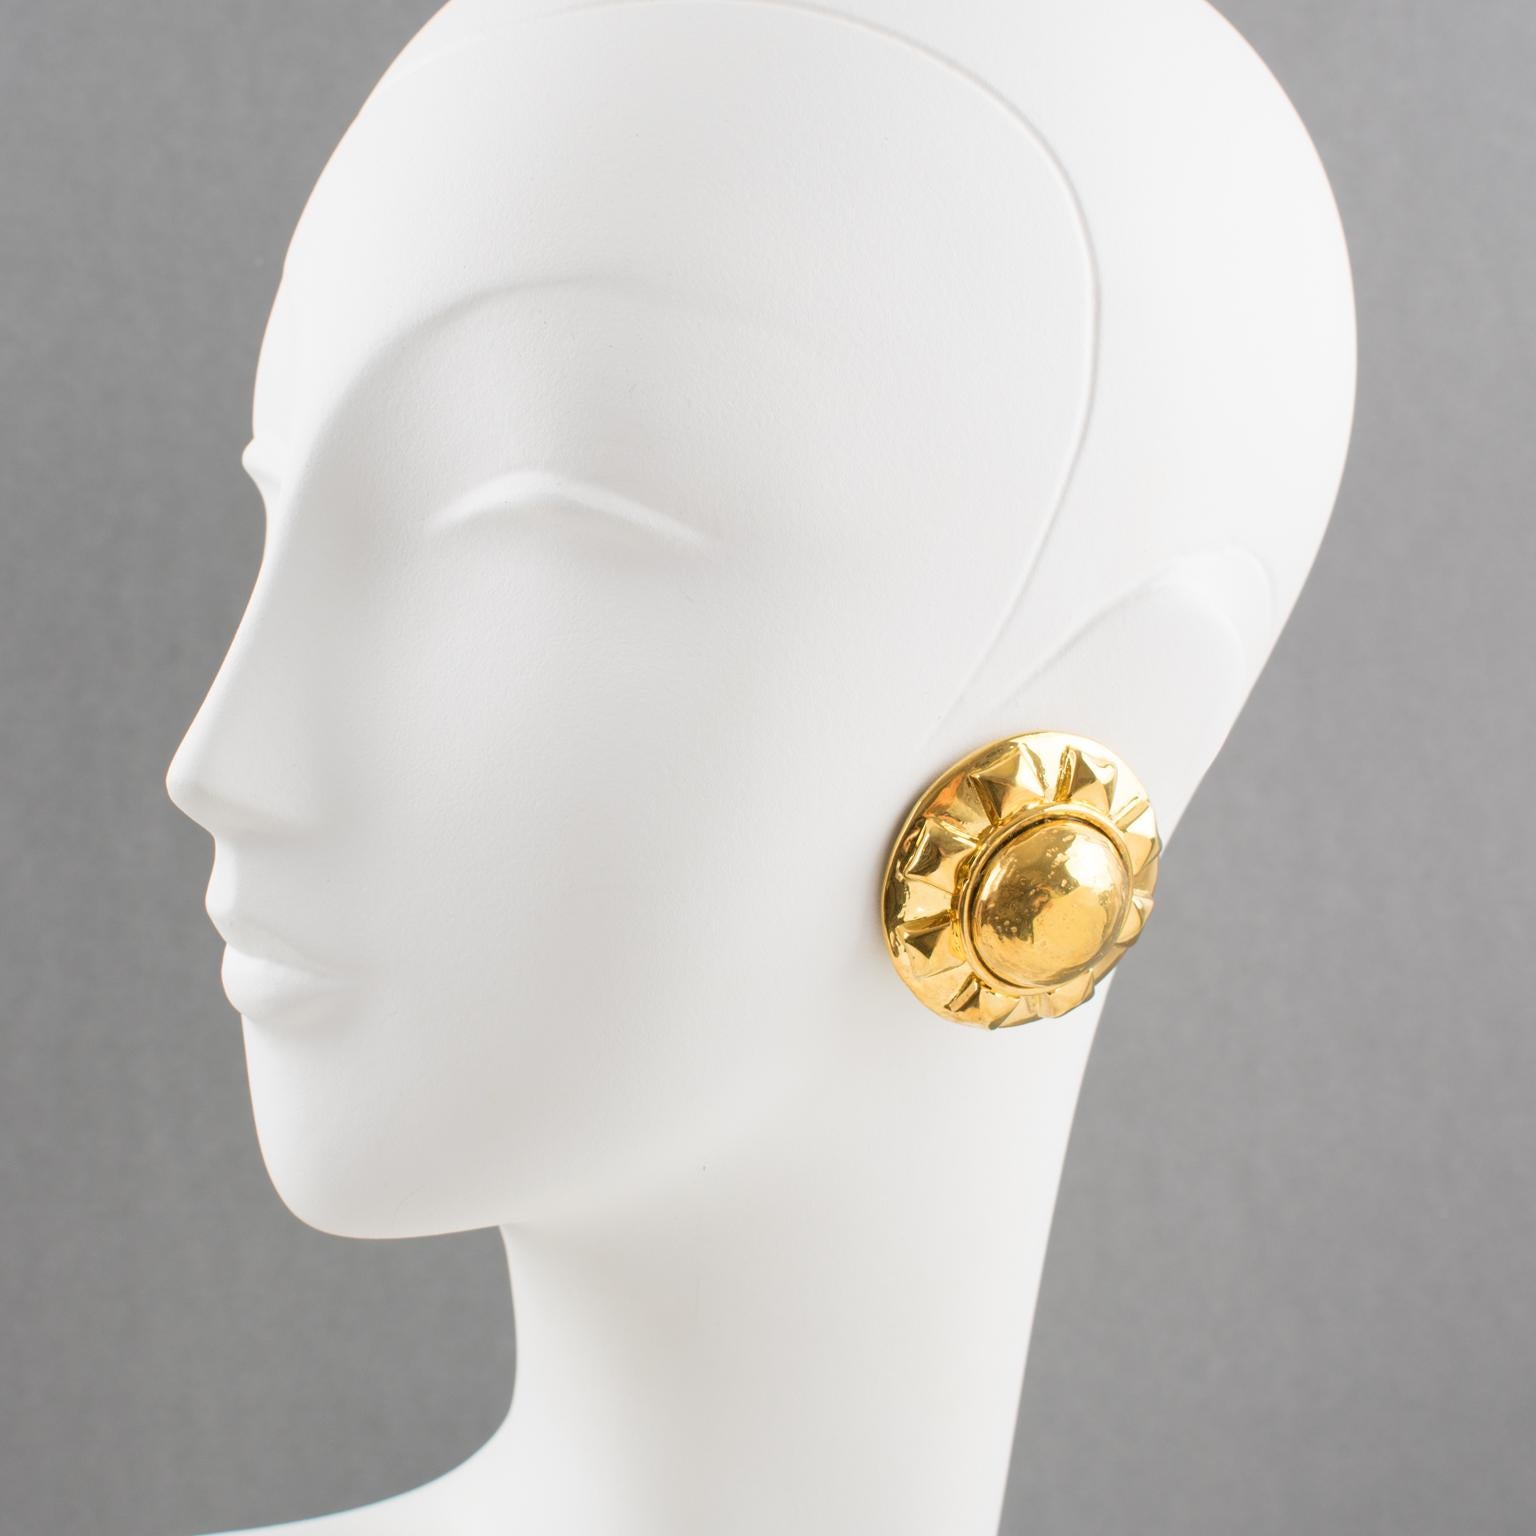 These elegant Kalinger Paris clip-on earrings feature an oversized heavily domed shape with gilt metal-coated resin with a sun-carved design pattern. There is no visible signature.
Measurements: 1.69 in. diameter (4.3 cm).